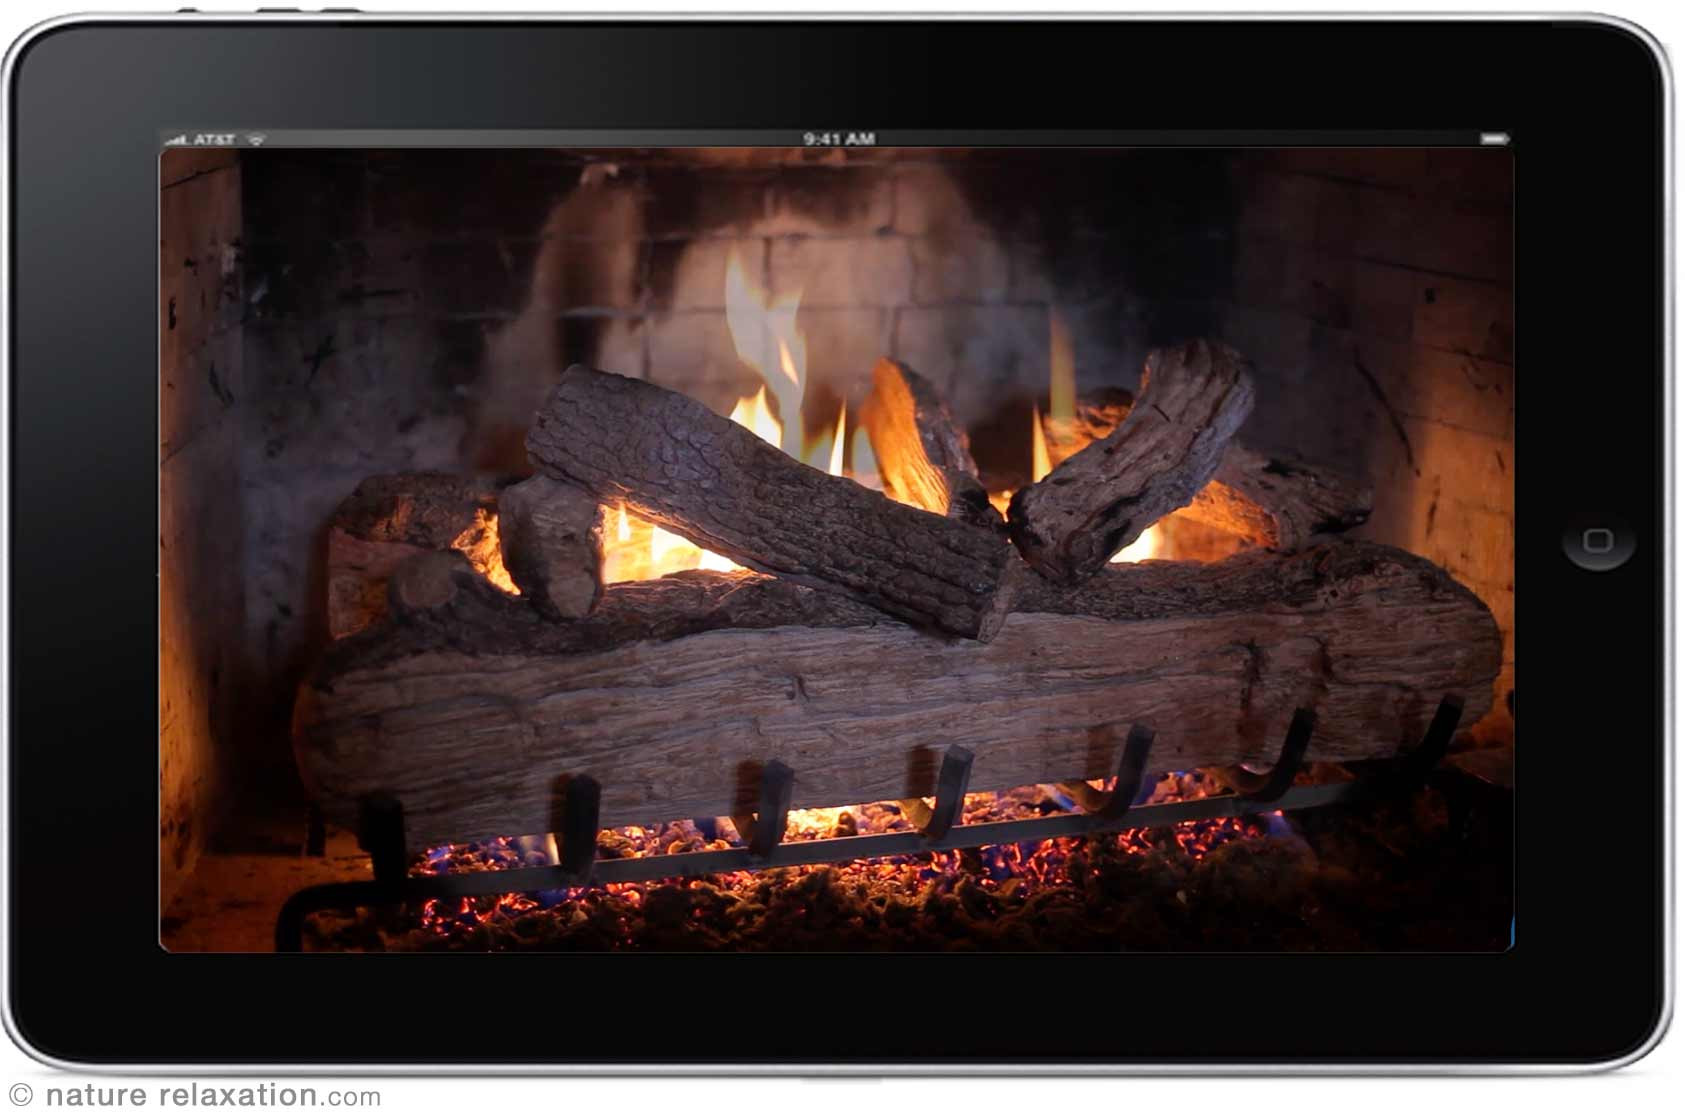 Crackling Fireplace Looping Nature Relaxation Video Screensaver HD